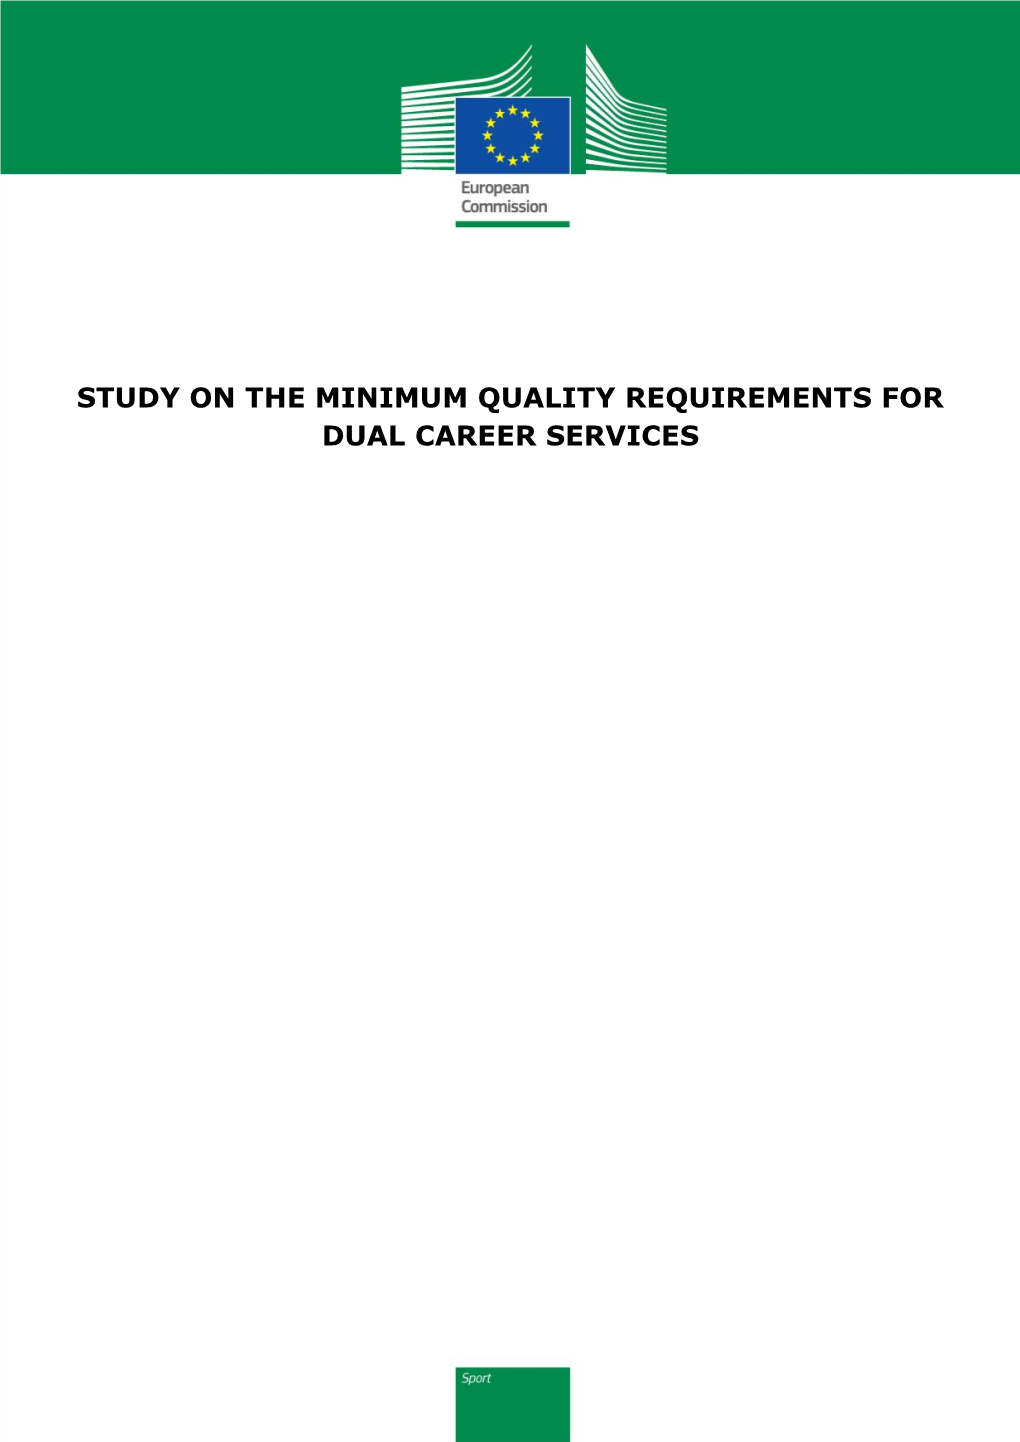 Study on the Minimum Quality Requirements for Dual Career Services